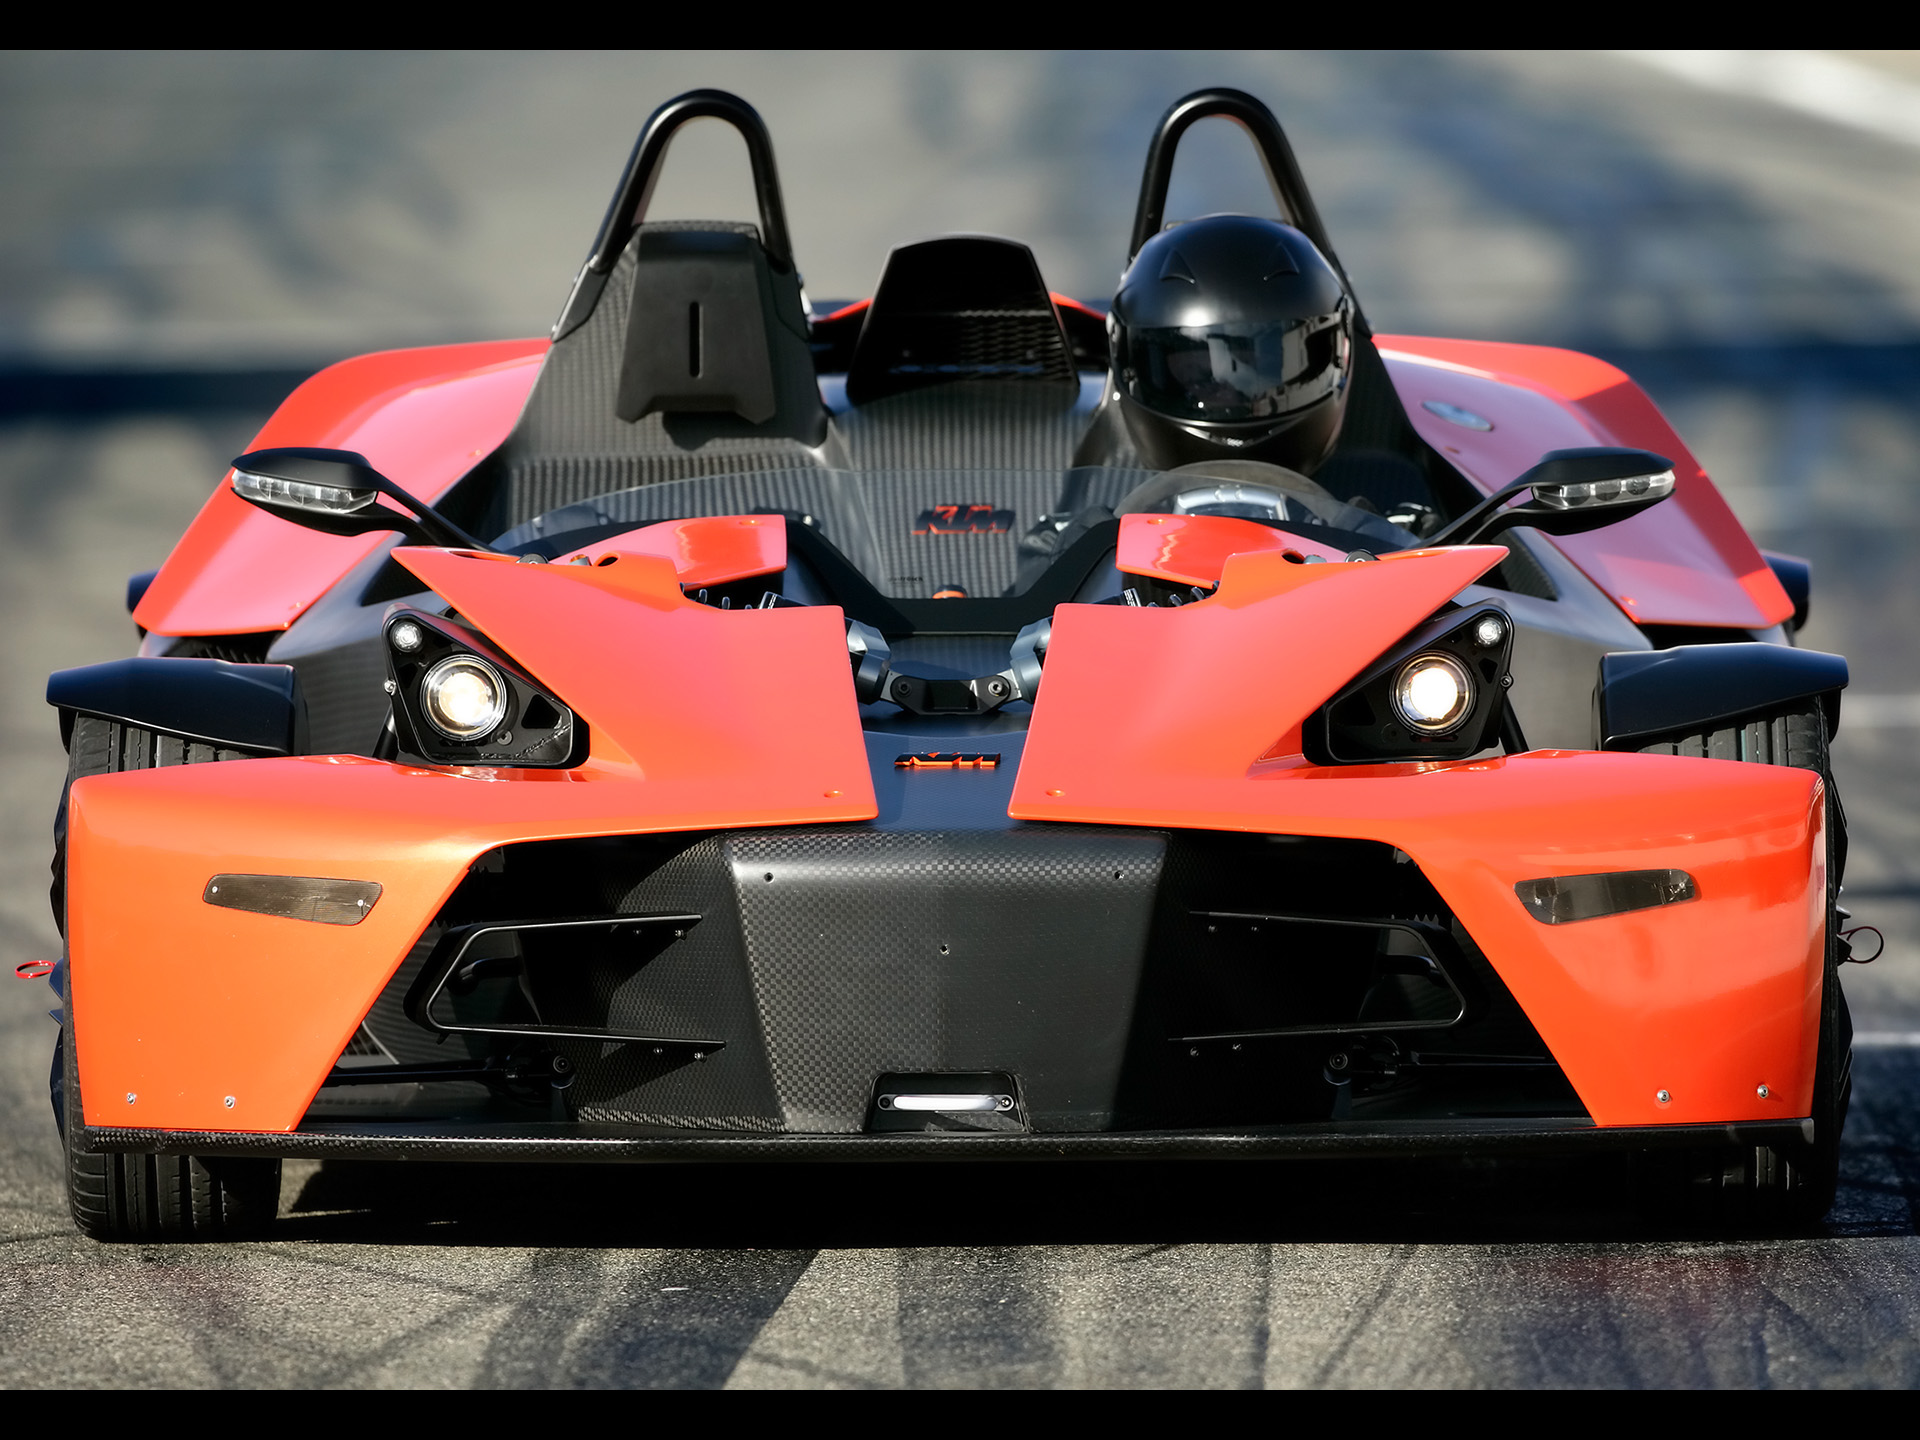 2007, Ktm, X bow, Prototype, Concept, Supercar, Supercars Wallpapers HD /  Desktop and Mobile Backgrounds